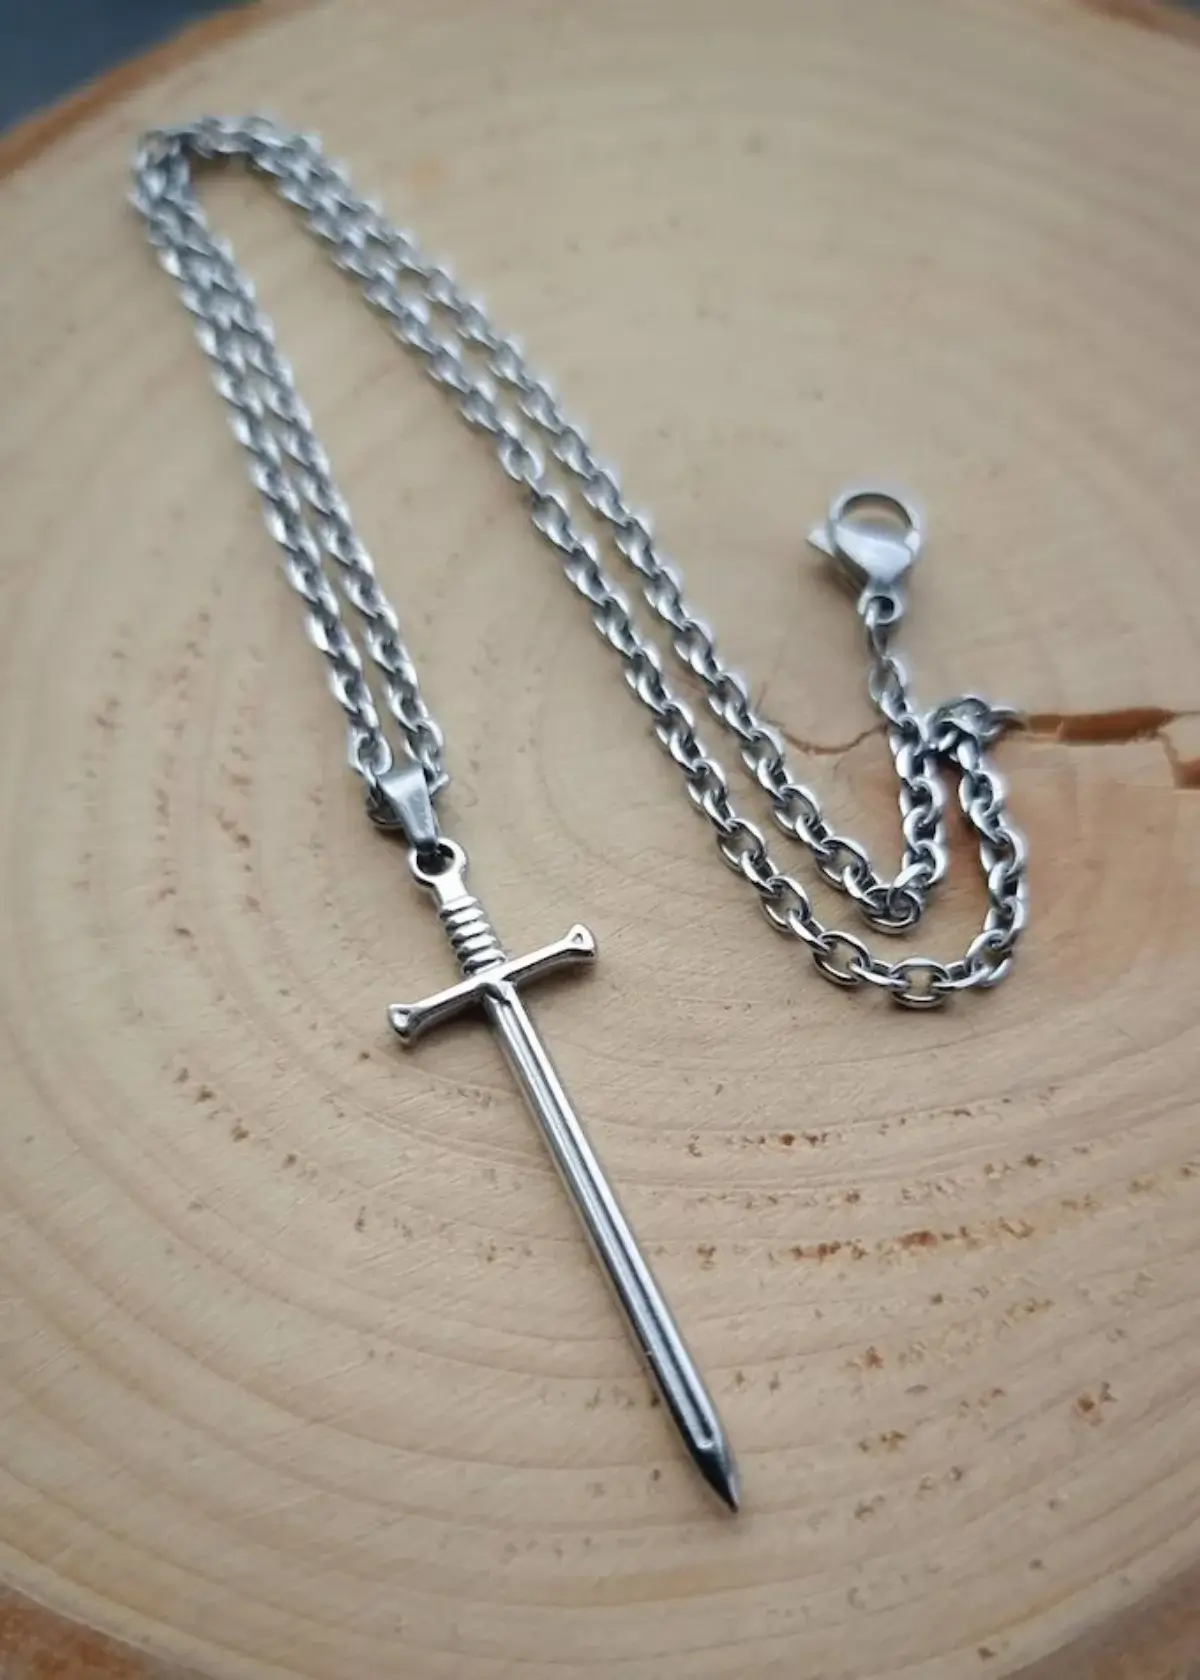 What materials are dagger necklaces made from?